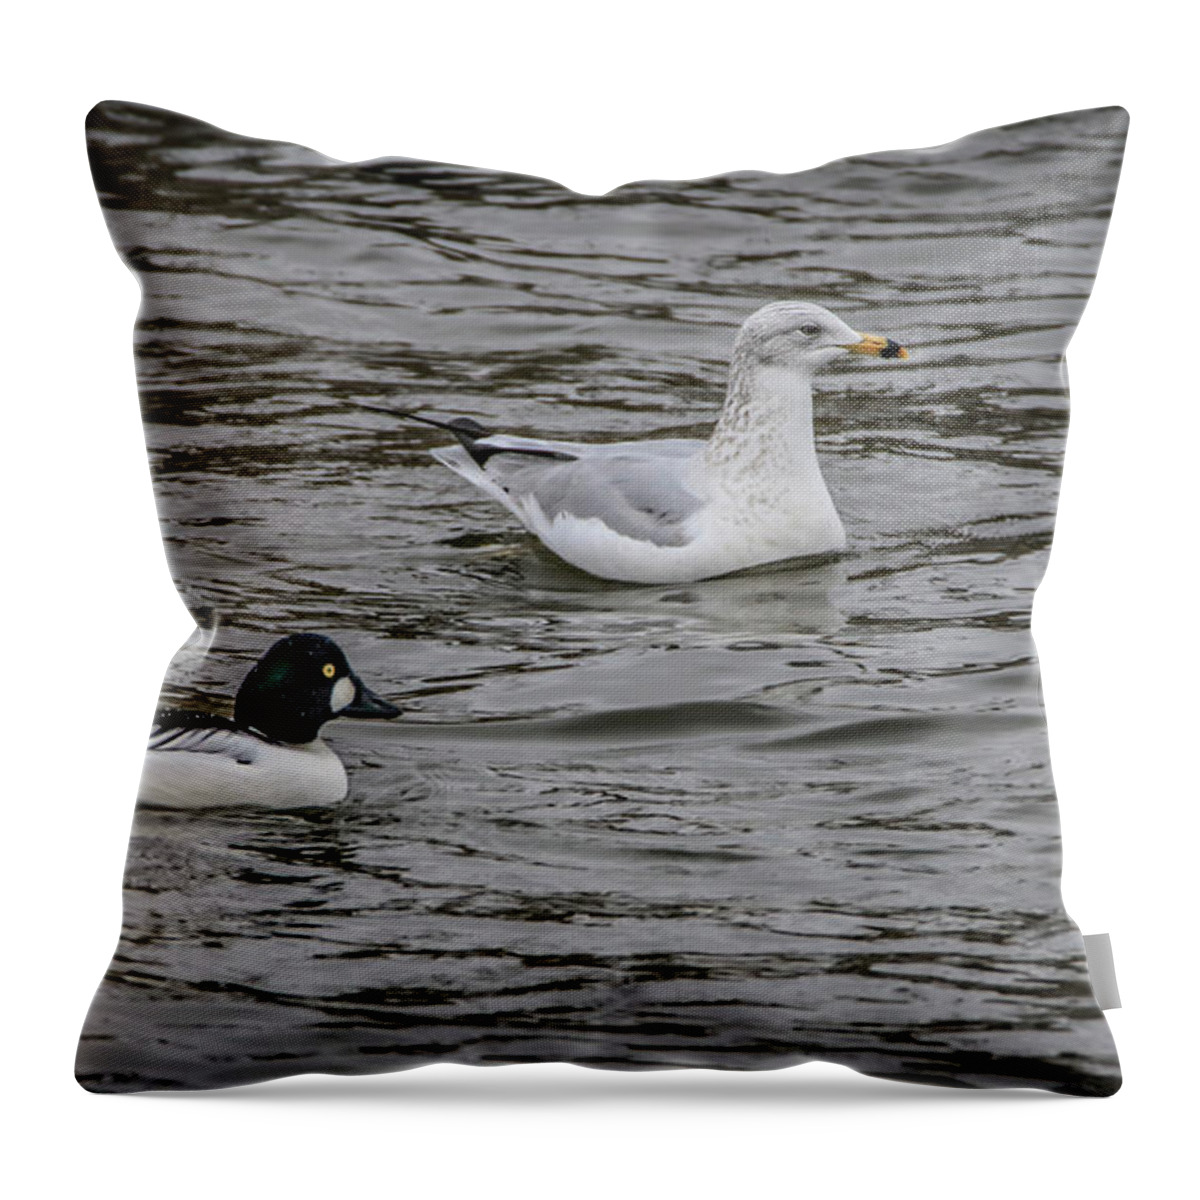 Waterfowl Throw Pillow featuring the photograph River To Share by Ray Congrove